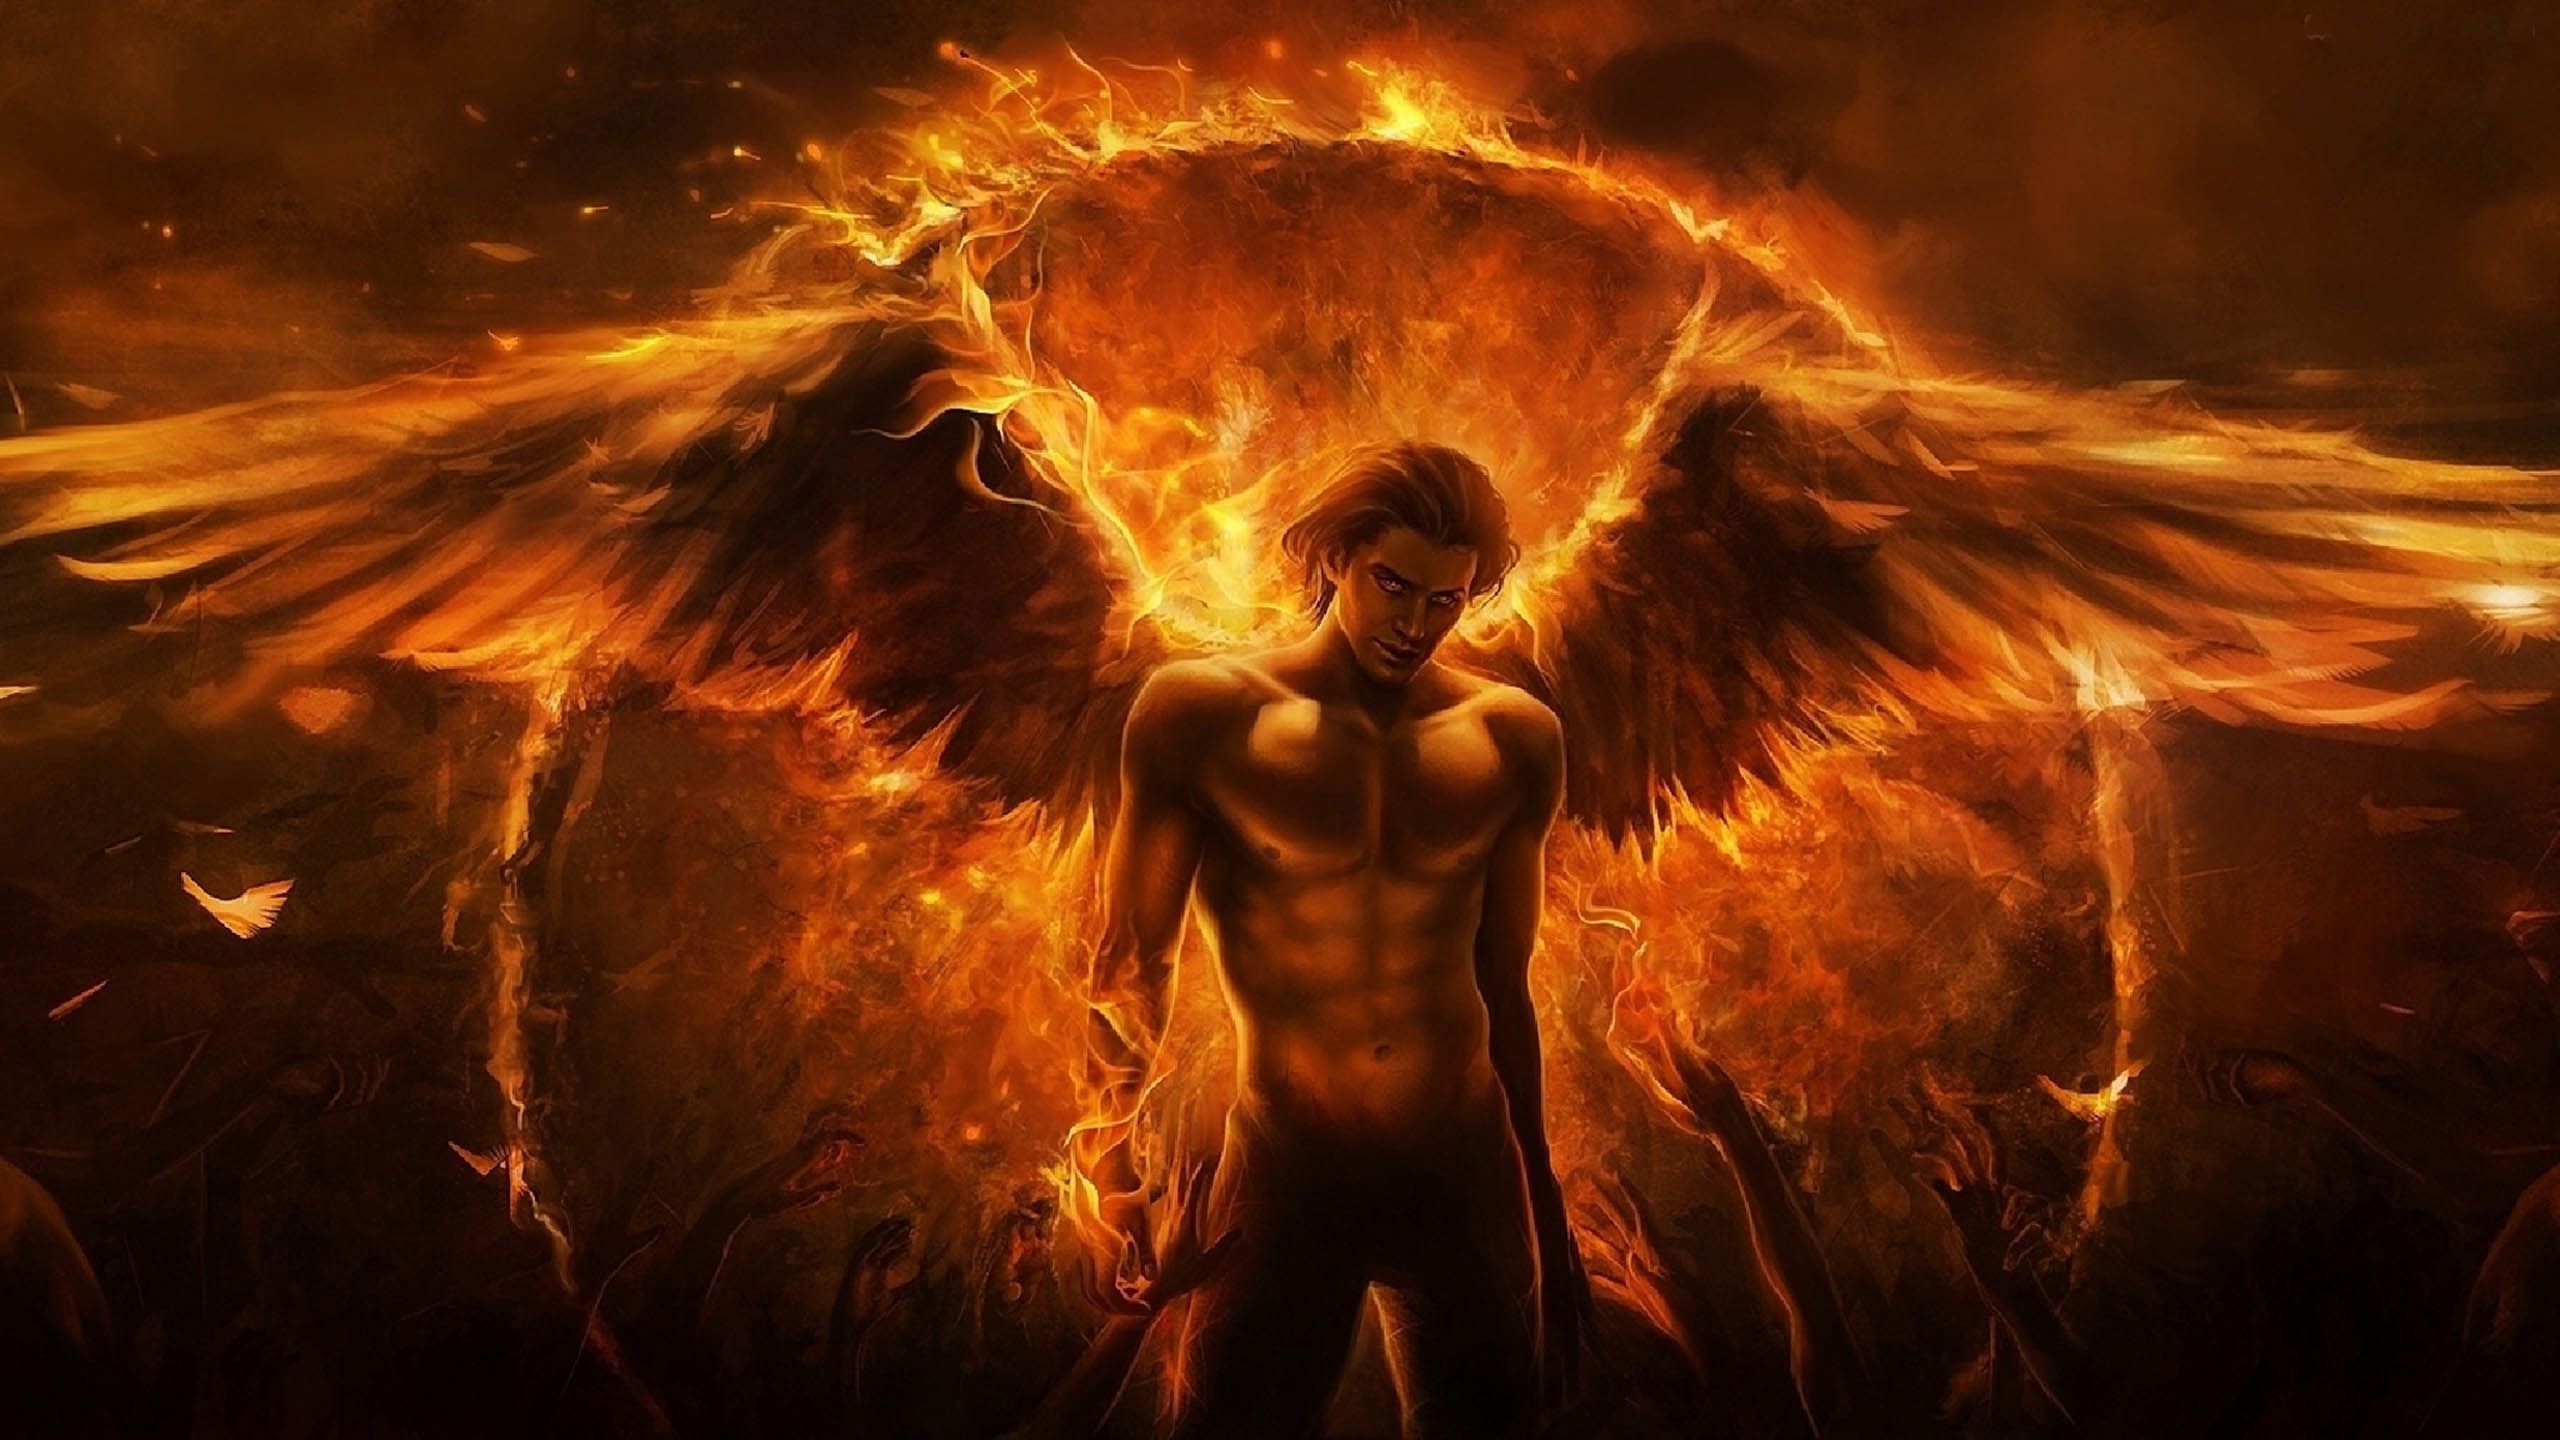 Abstract Man Angel Artwork Design Fire Demon Hd Wallpapers for Iphone : Wal...